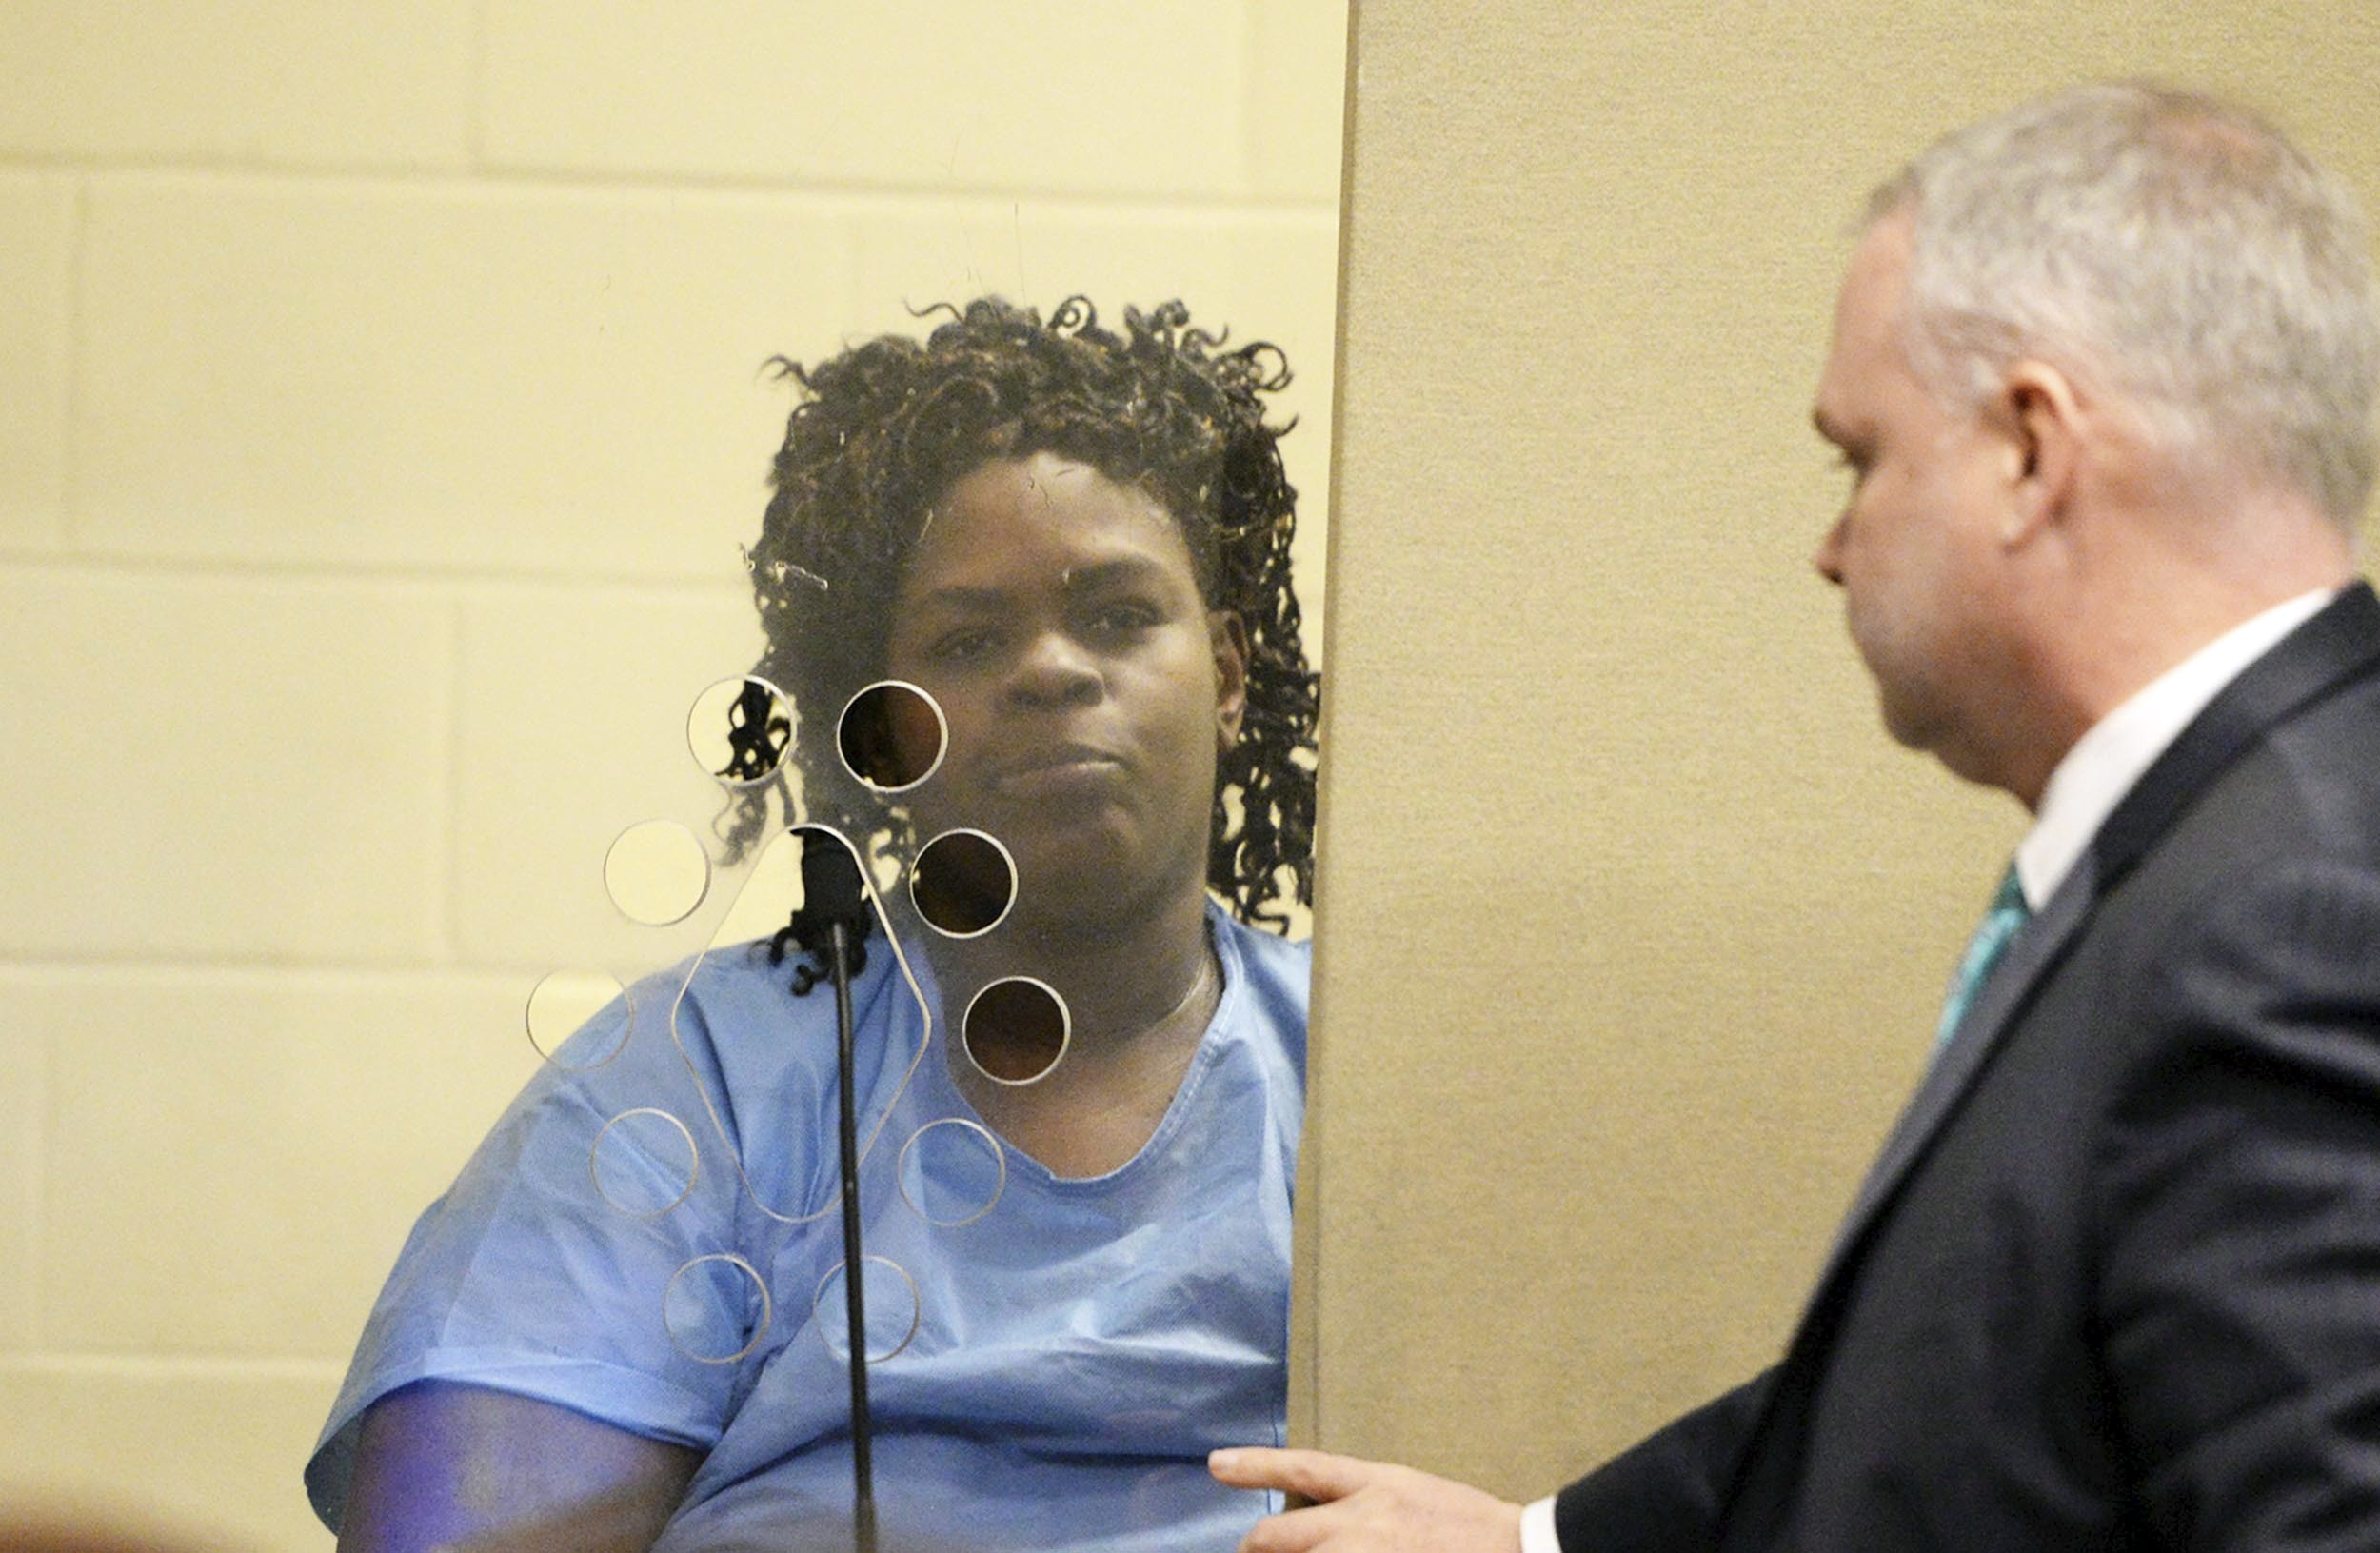 Latarsha Sander convicted for stabbing her son's multiple times